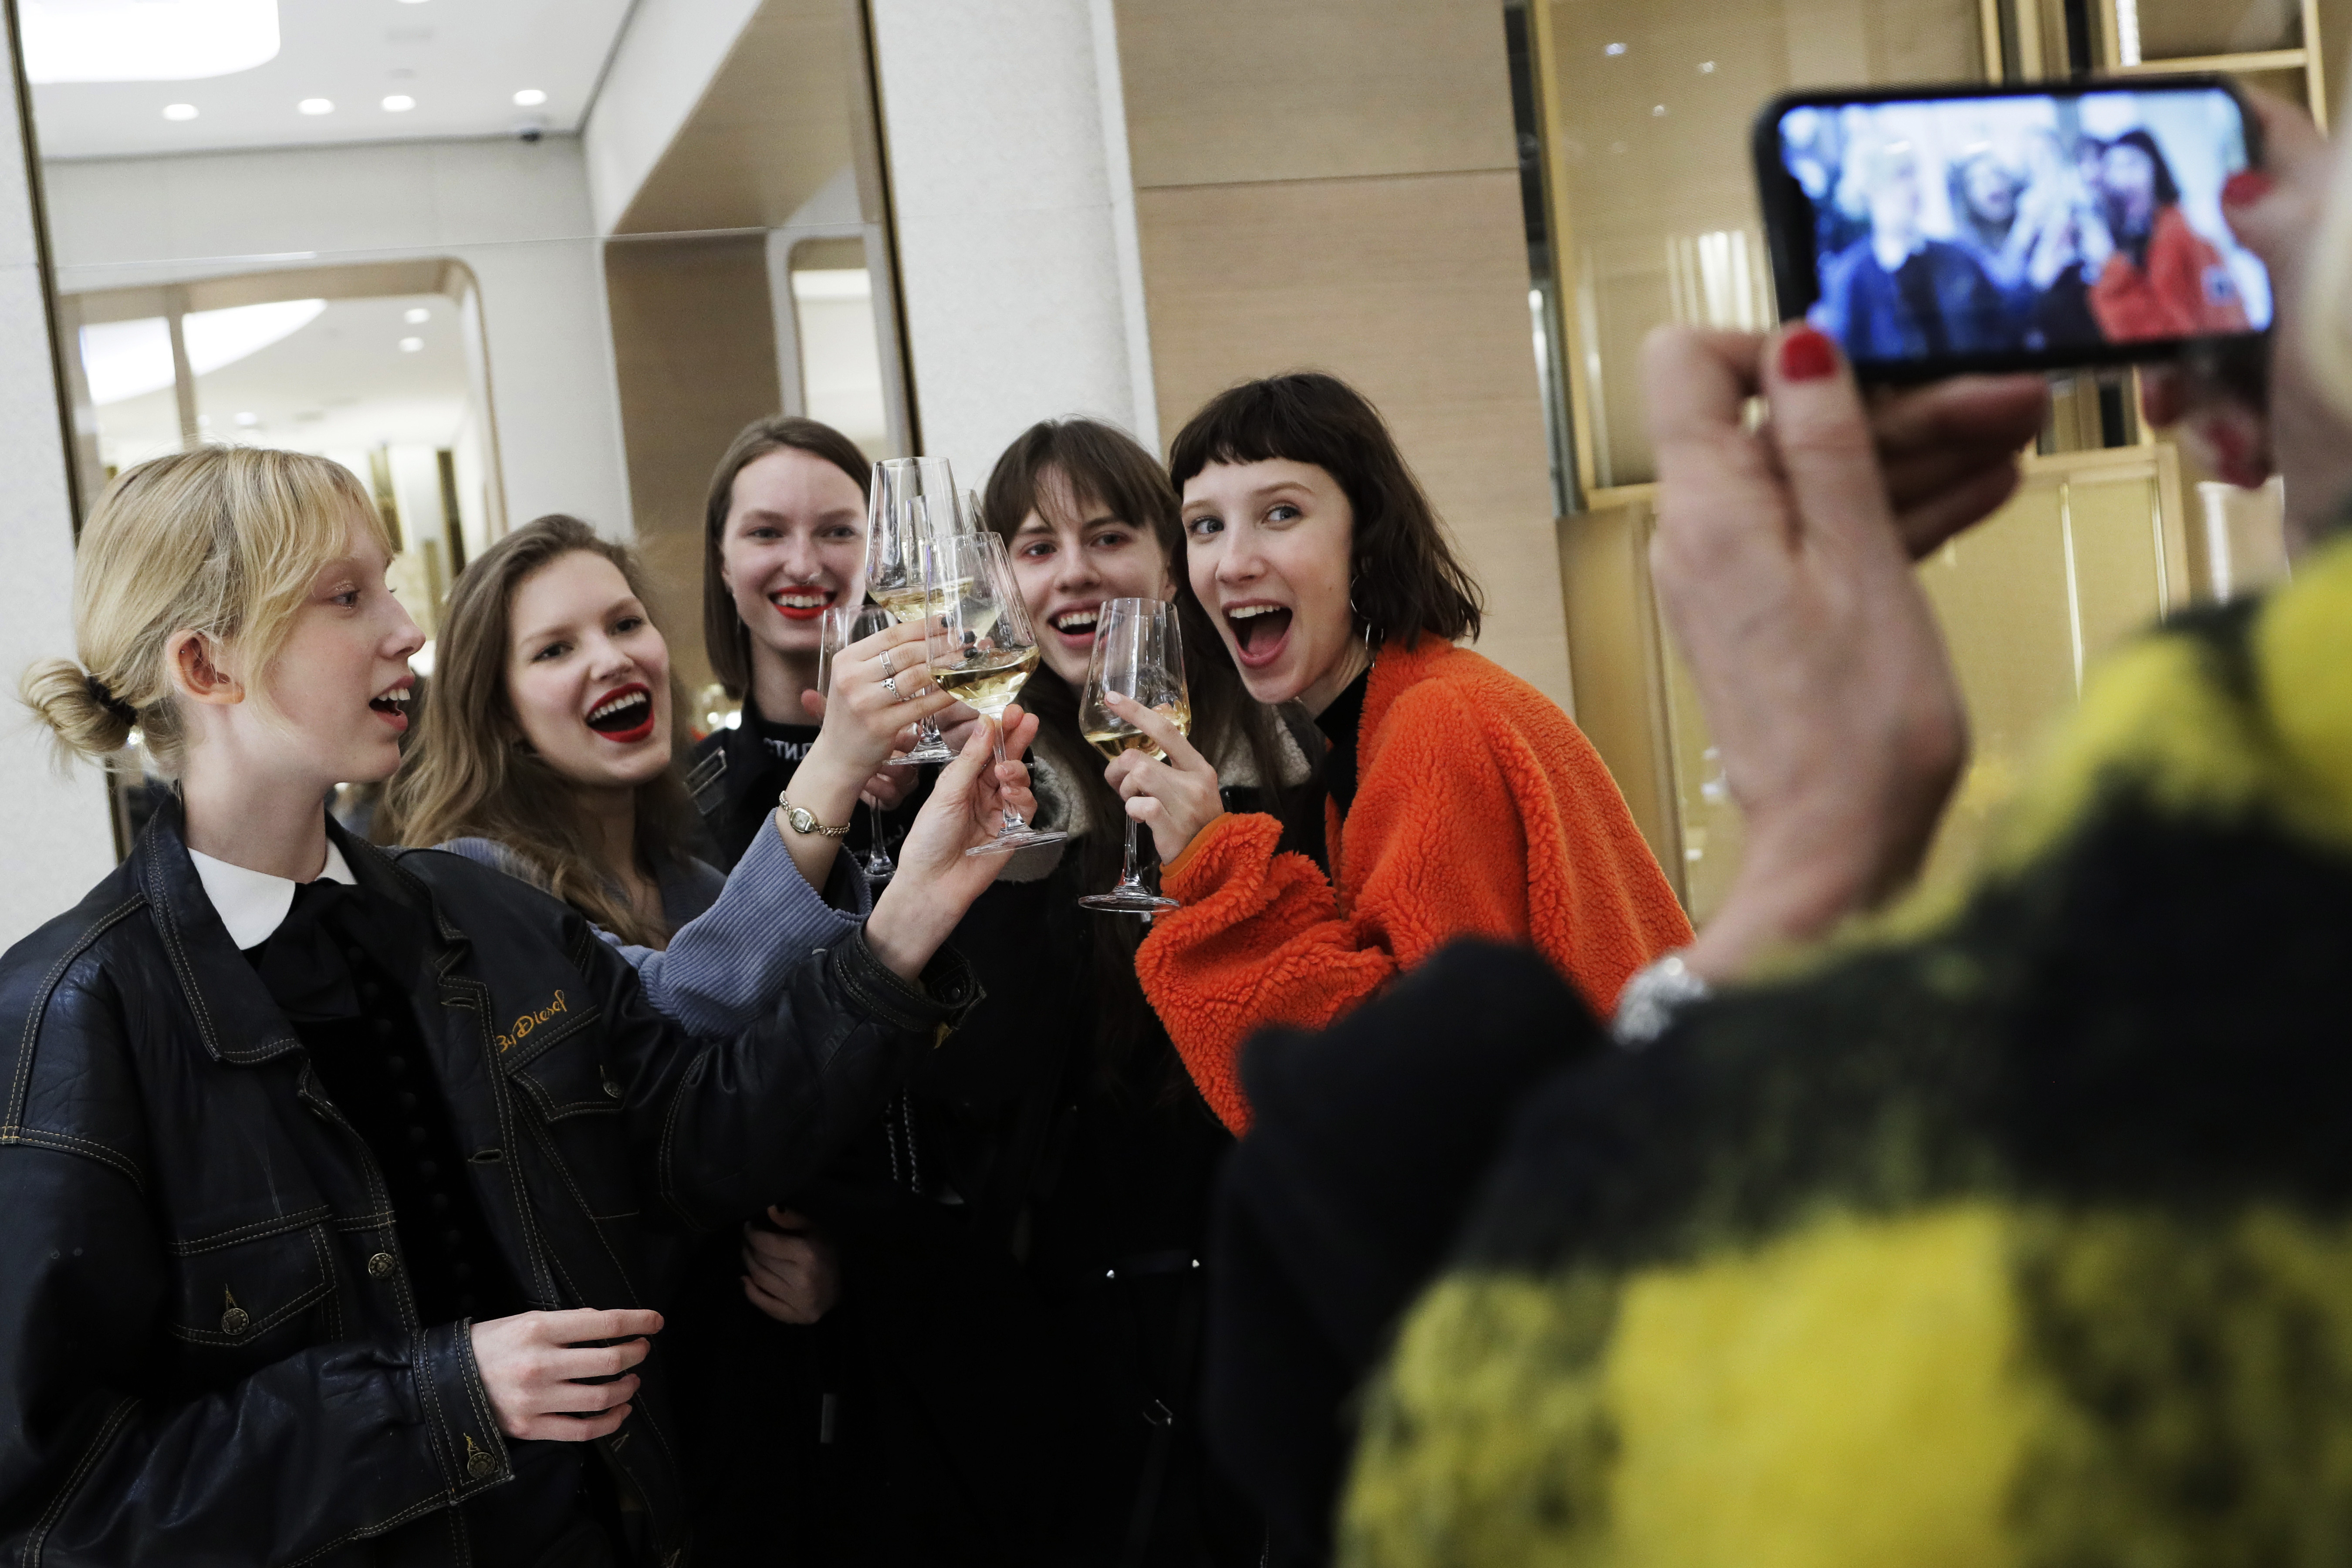 Women celebrate at a Cartier store during the opening night of The Shops & Restaurants at Hudson Yards, Thursday, March 14, 2019, in New York. Hudson Yards, a $25 billion urban complex on Manhattan's west side, is the city's most ambitious development since the rebuilding of the World Trade Center. When fully complete, the 28-acre site will include 16 towers of homes and offices, a hotel, a school, the highest outdoor observation deck in the Western Hemisphere, a performing arts center and the shopping mall. (AP Photo/Mark Lennihan)